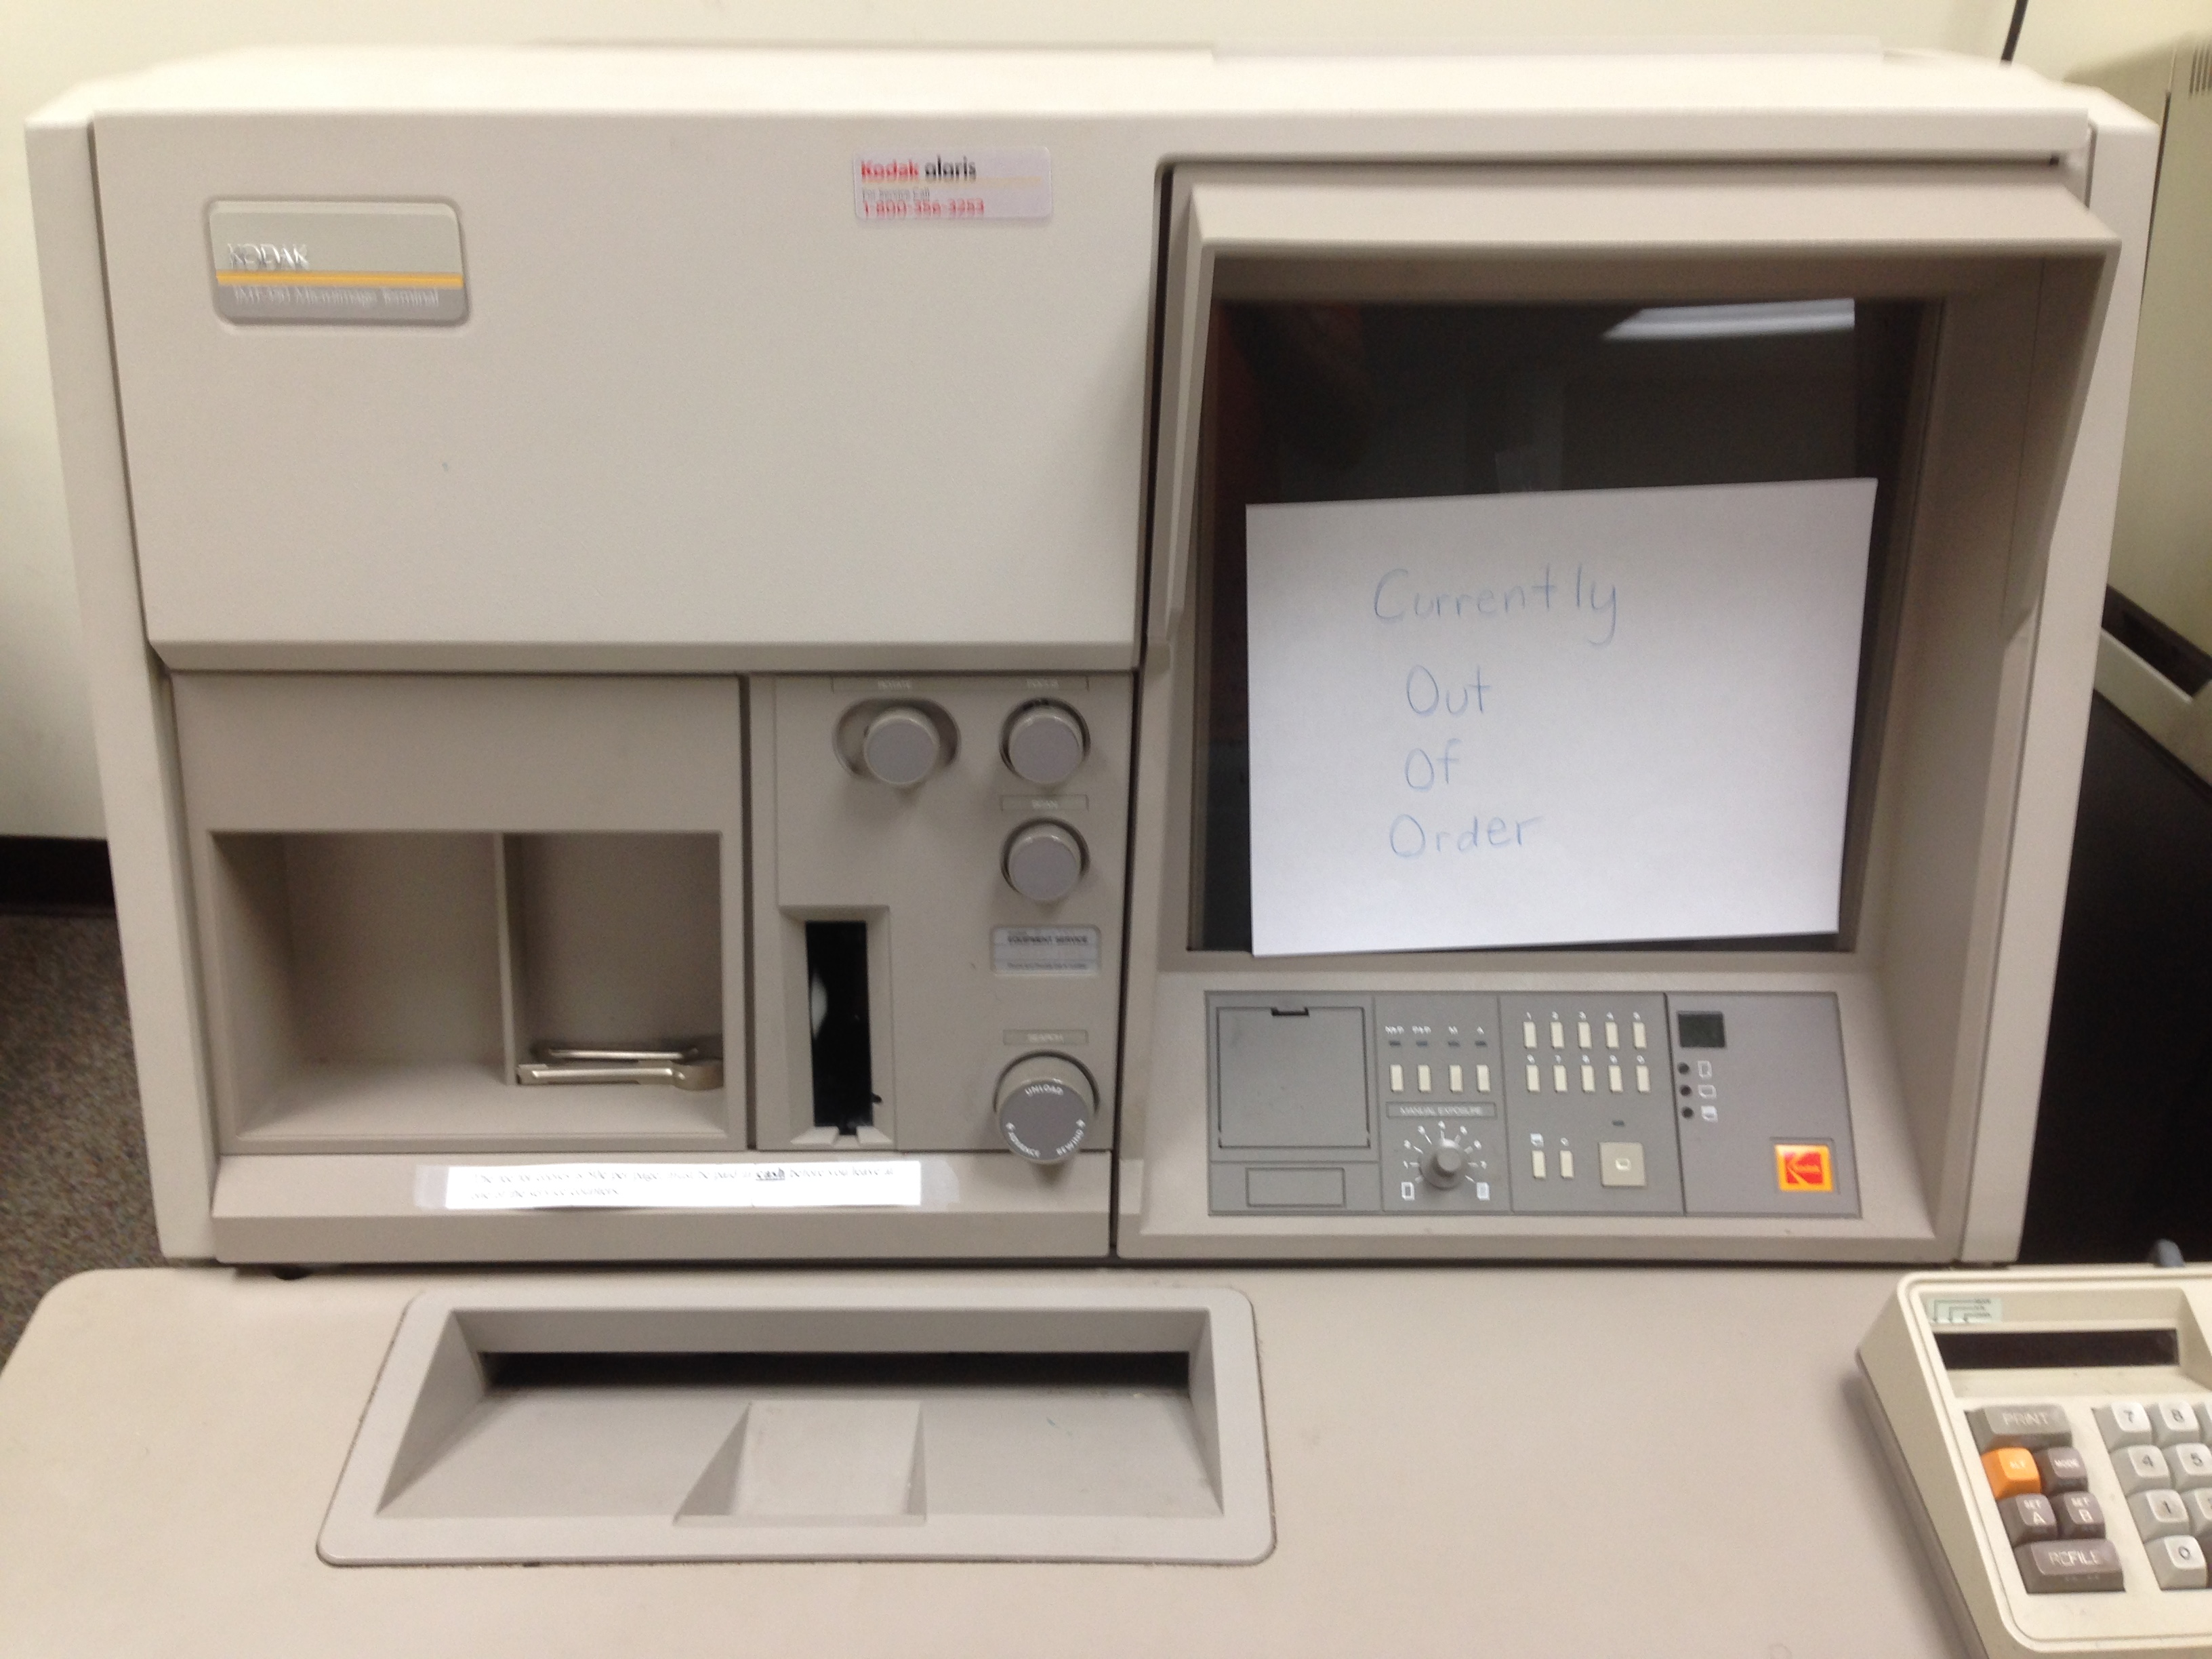 Image of Microfilm Reader with out-of-order sign